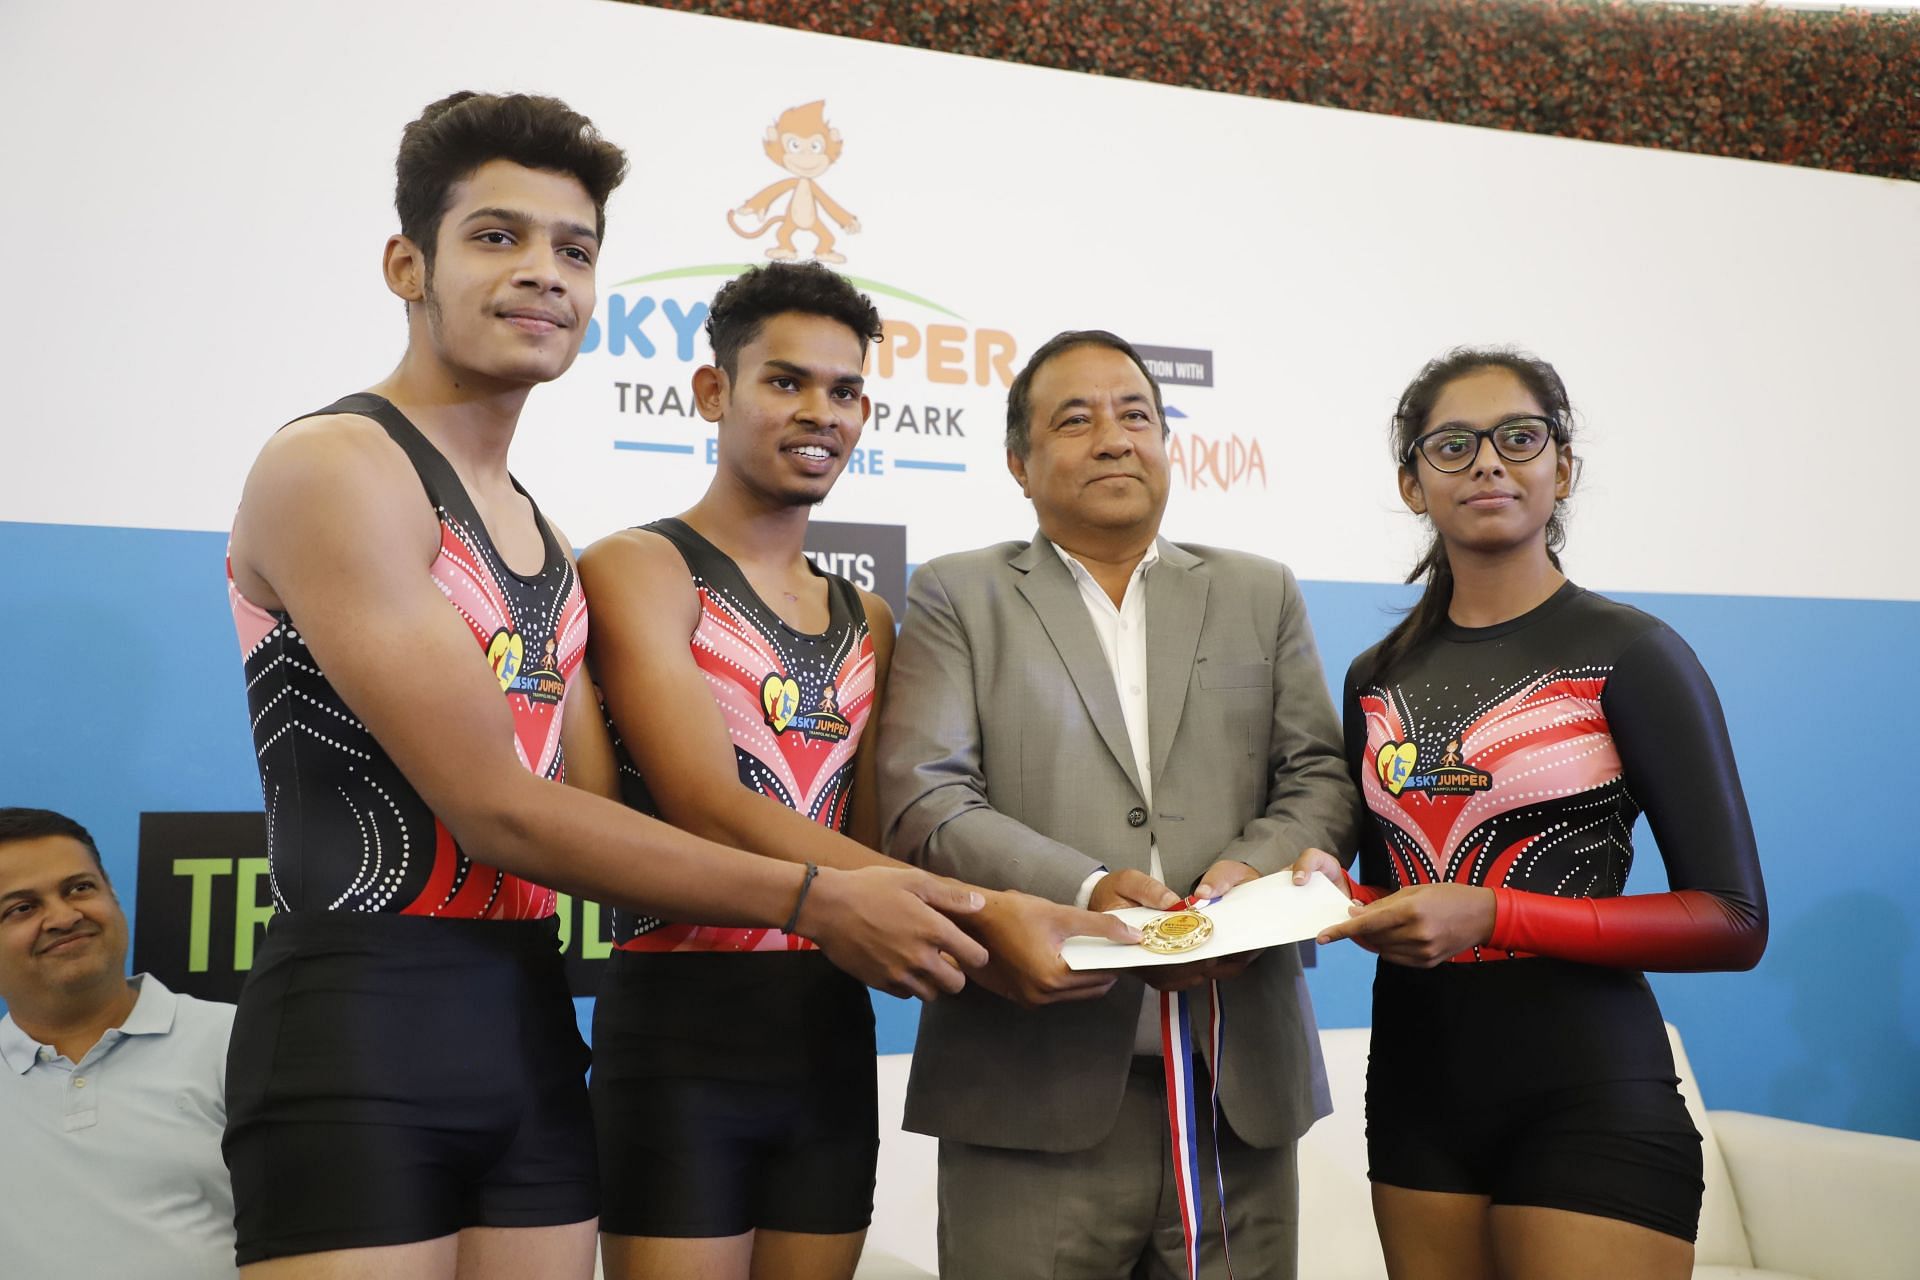 Rahi Pakhle (first from right) receives the gold medal with her teammates. (Picture Credits: SkyJumper Sports and Amusements Pvt. Ltd.)